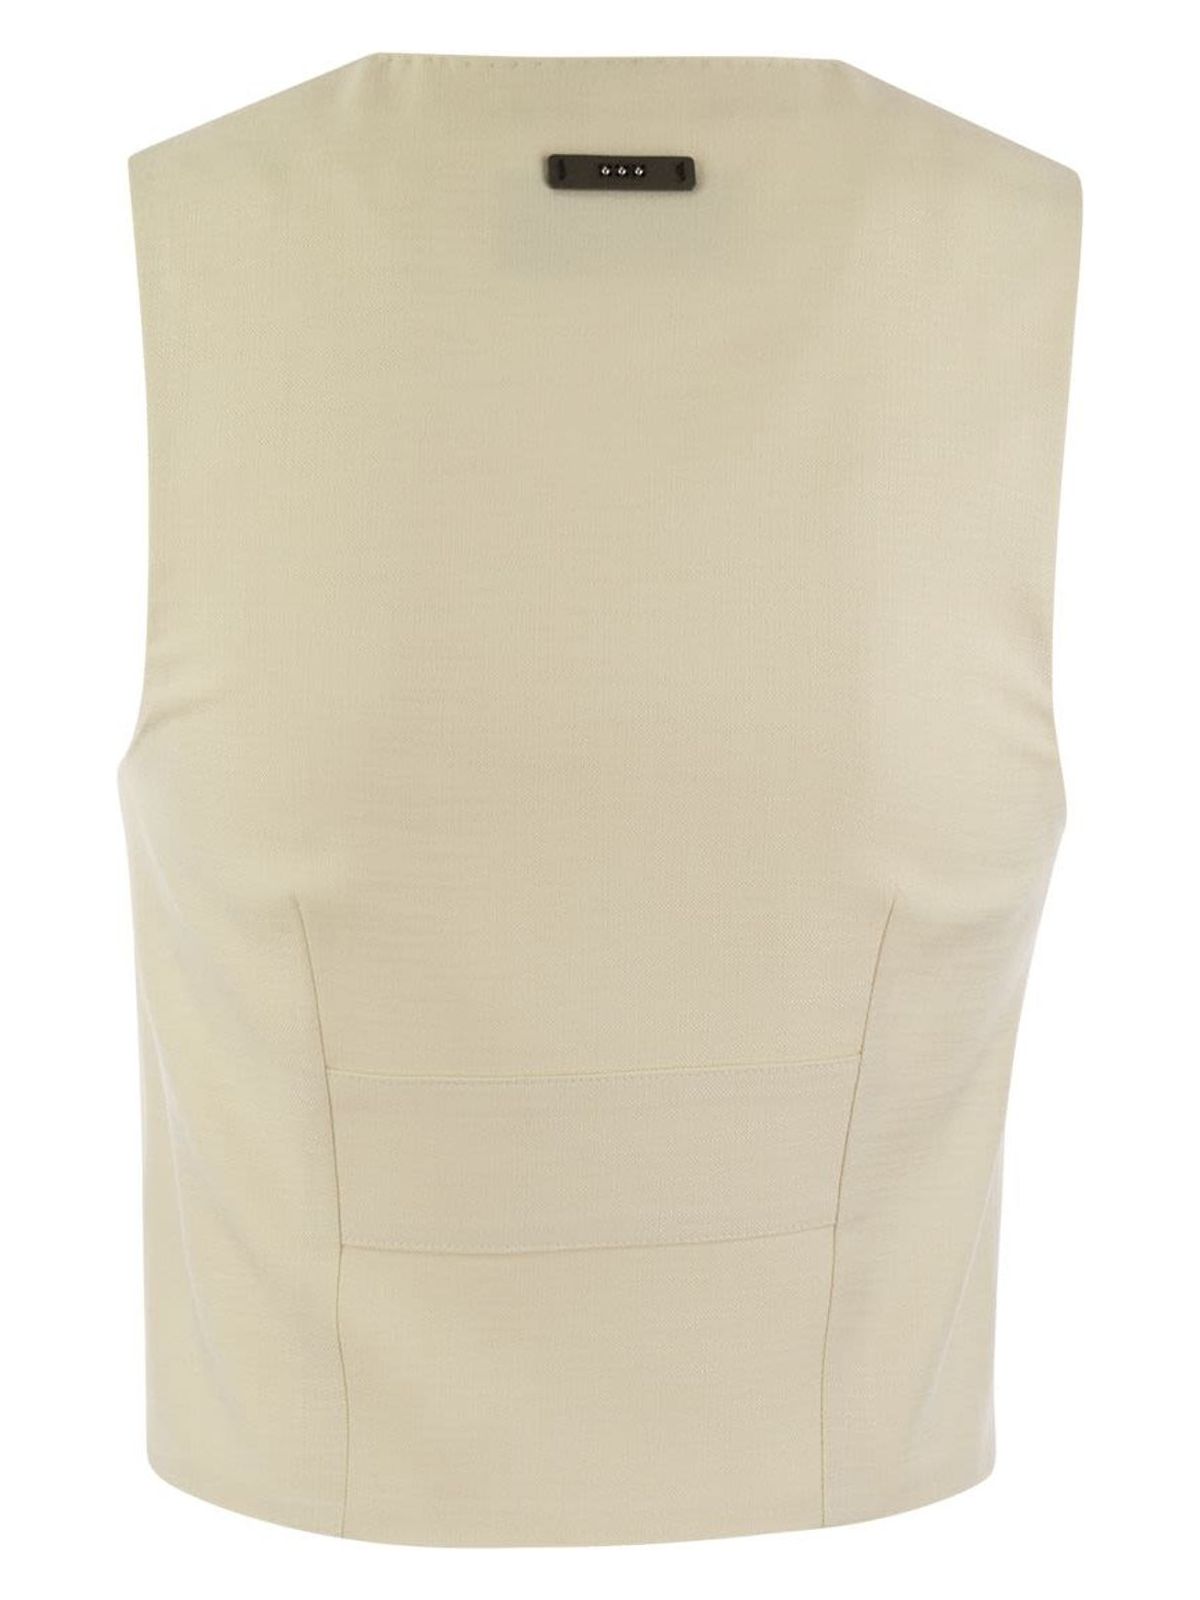 743 PESERICO SINGLE-BREASTED WAISTCOAT IN STRETCH VISCOSE-BLEND CANVAS